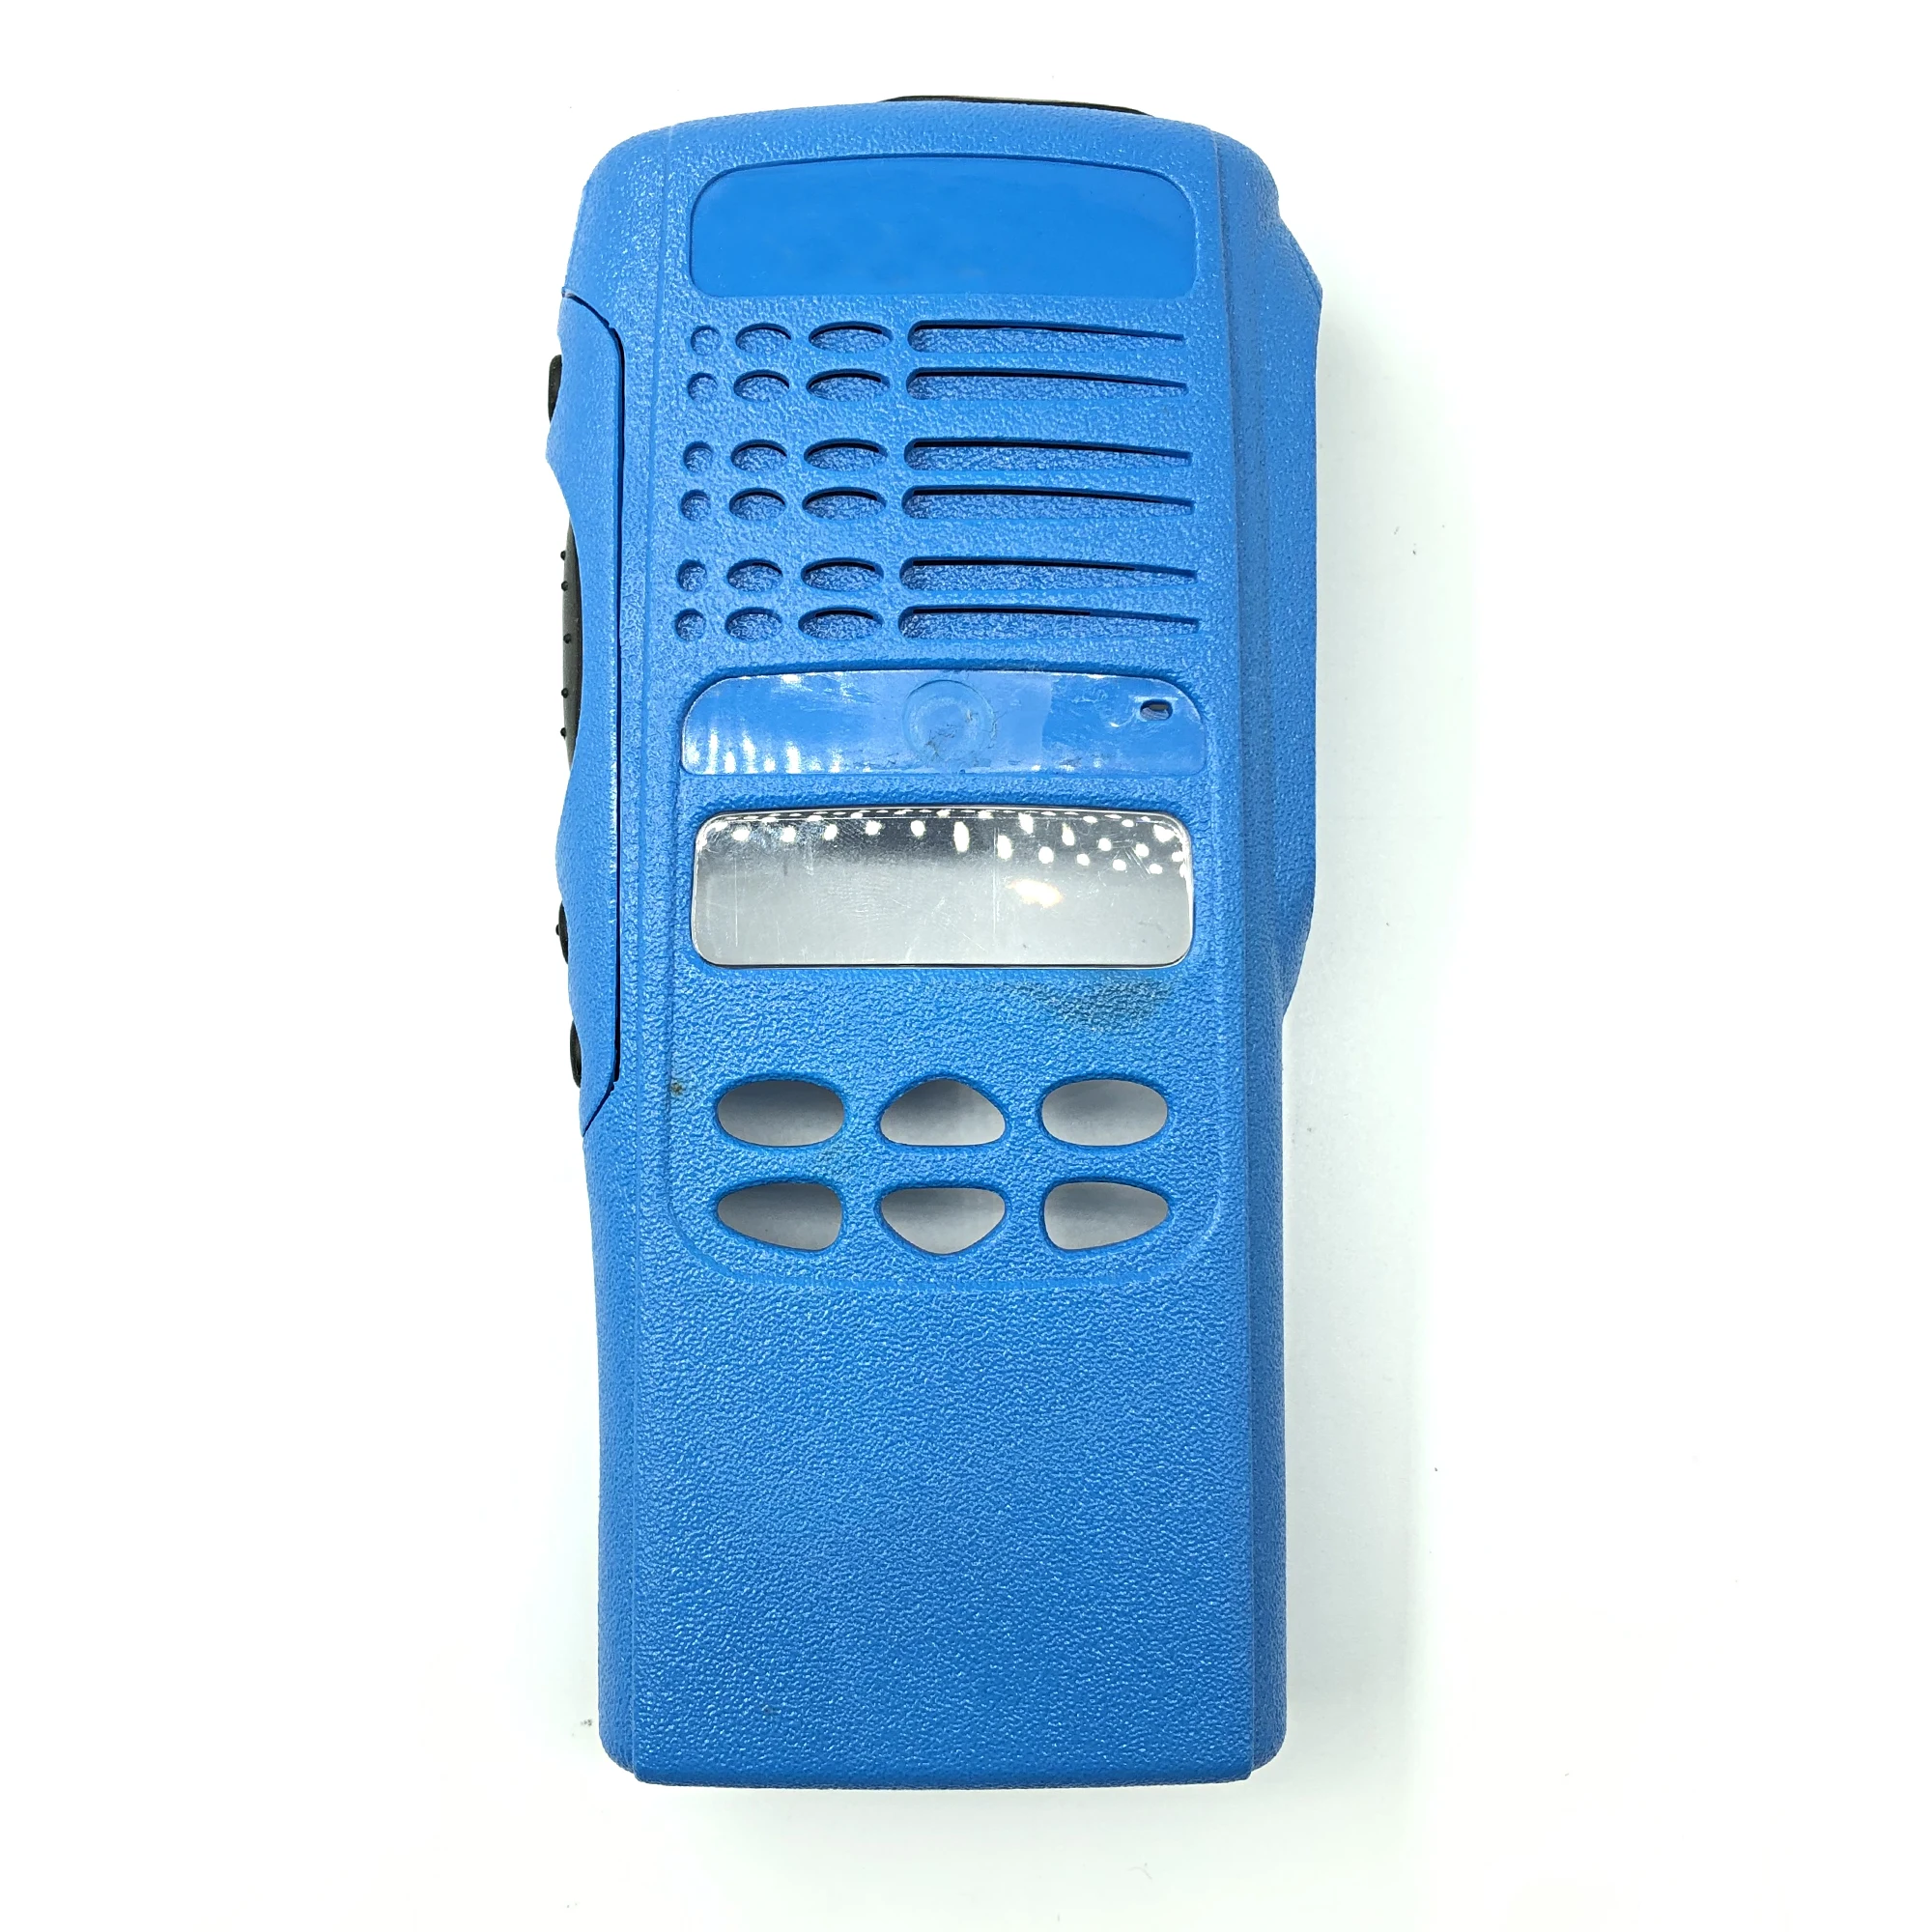 Blue Limited-keypad Replacement Housing Cover Case Kit For GP338 HT1250 Portable Radio